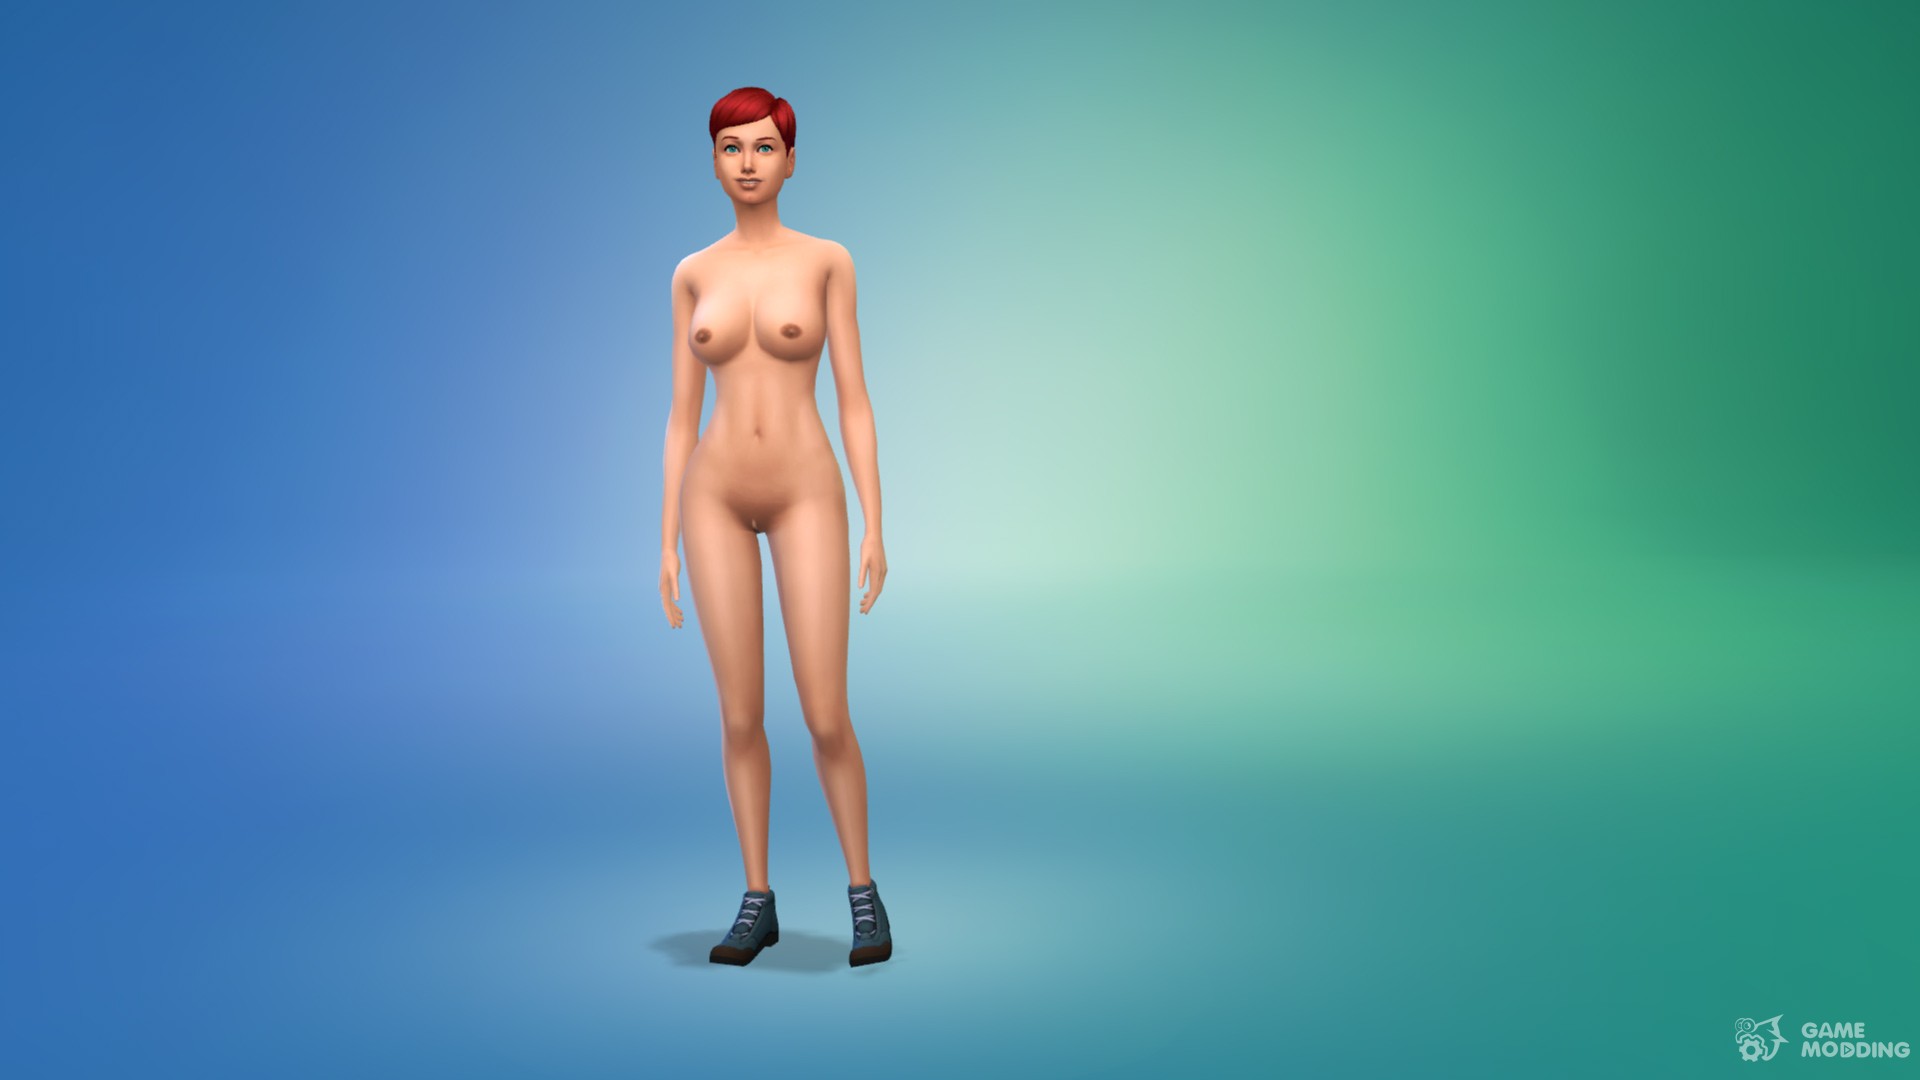 dena saunders recommends the sims 3 naked mod pic